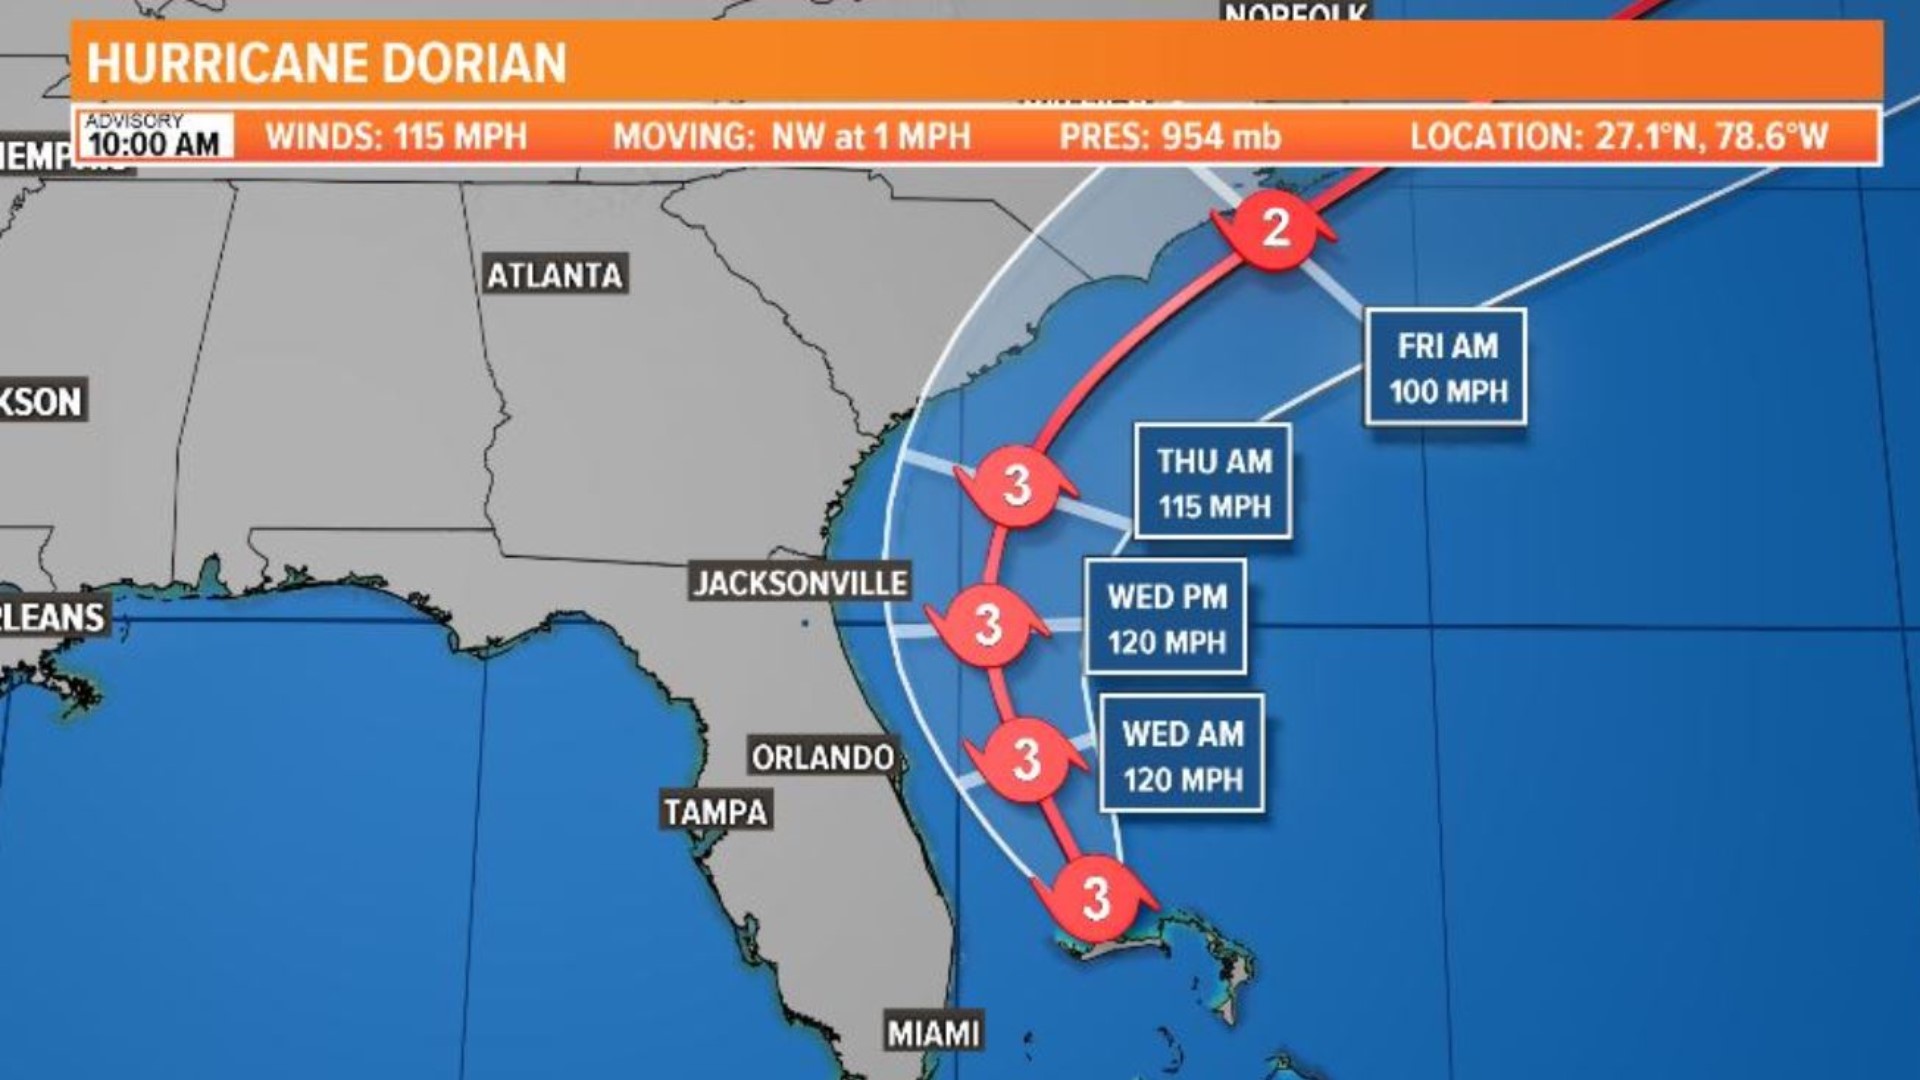 As Hurricane Dorian gets closer to the First Coast, the storm has weakened significantly.